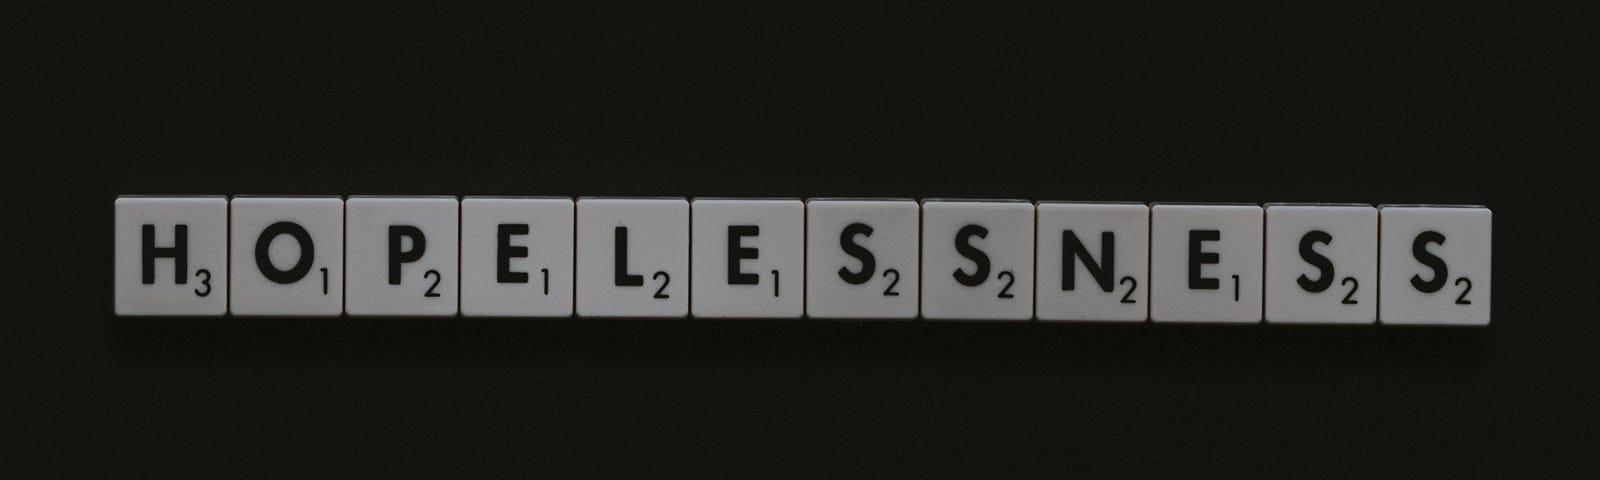 The word “hopelessness” spelled out in Scrabble tiles on a black backgrouns.